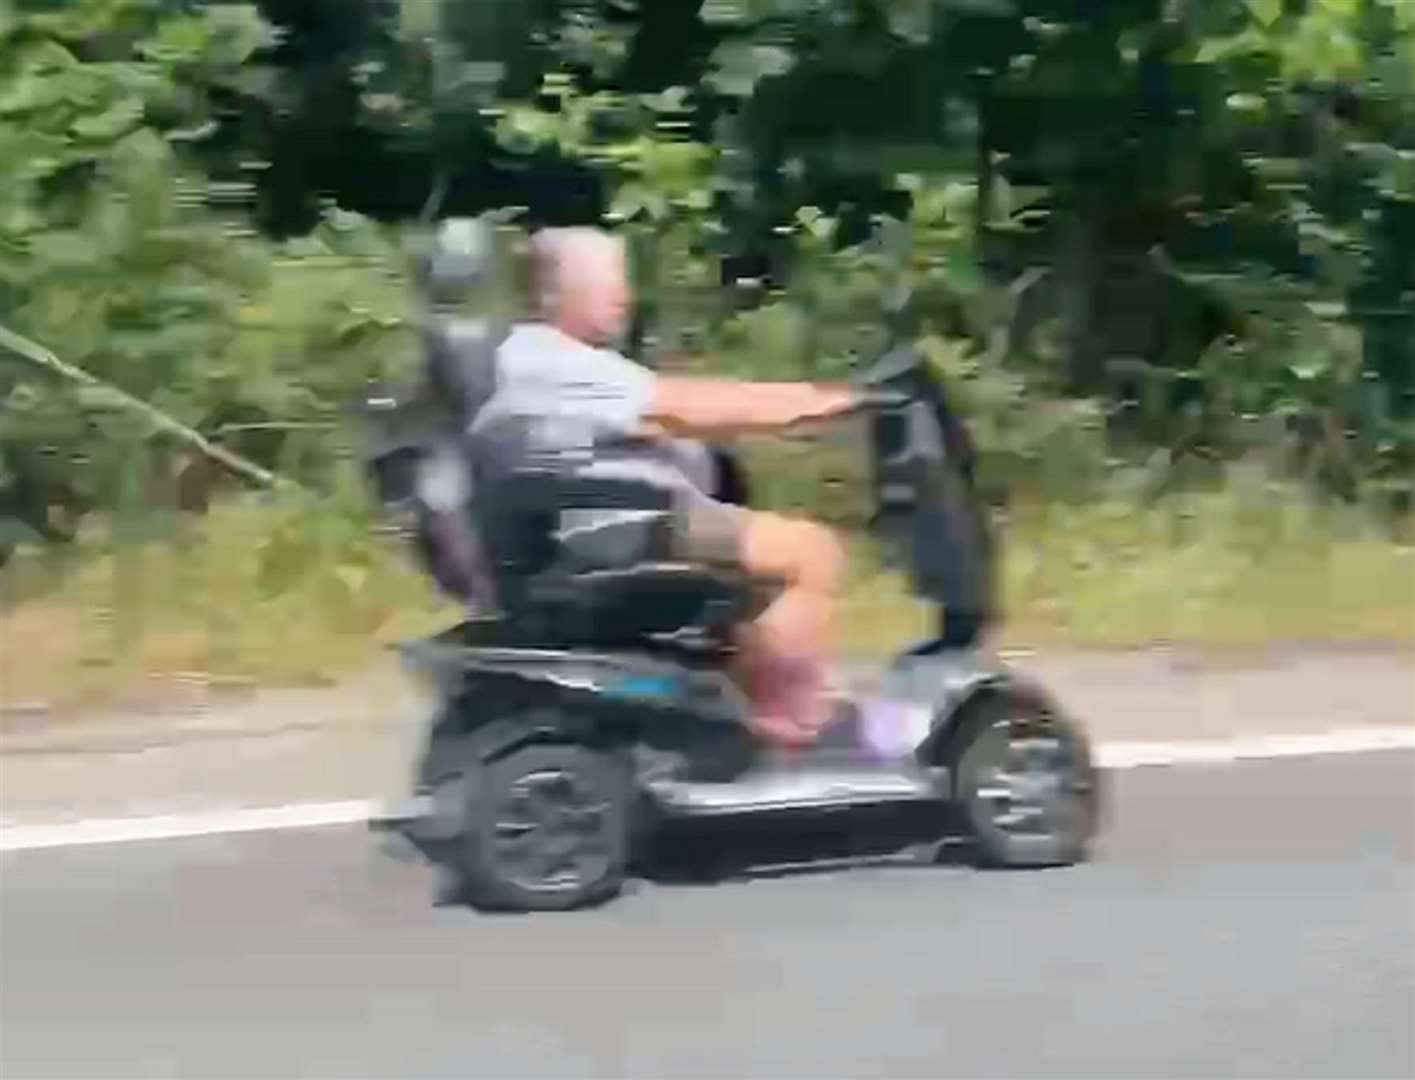 The mobility scooter moseying along the 70mph dual carriageway